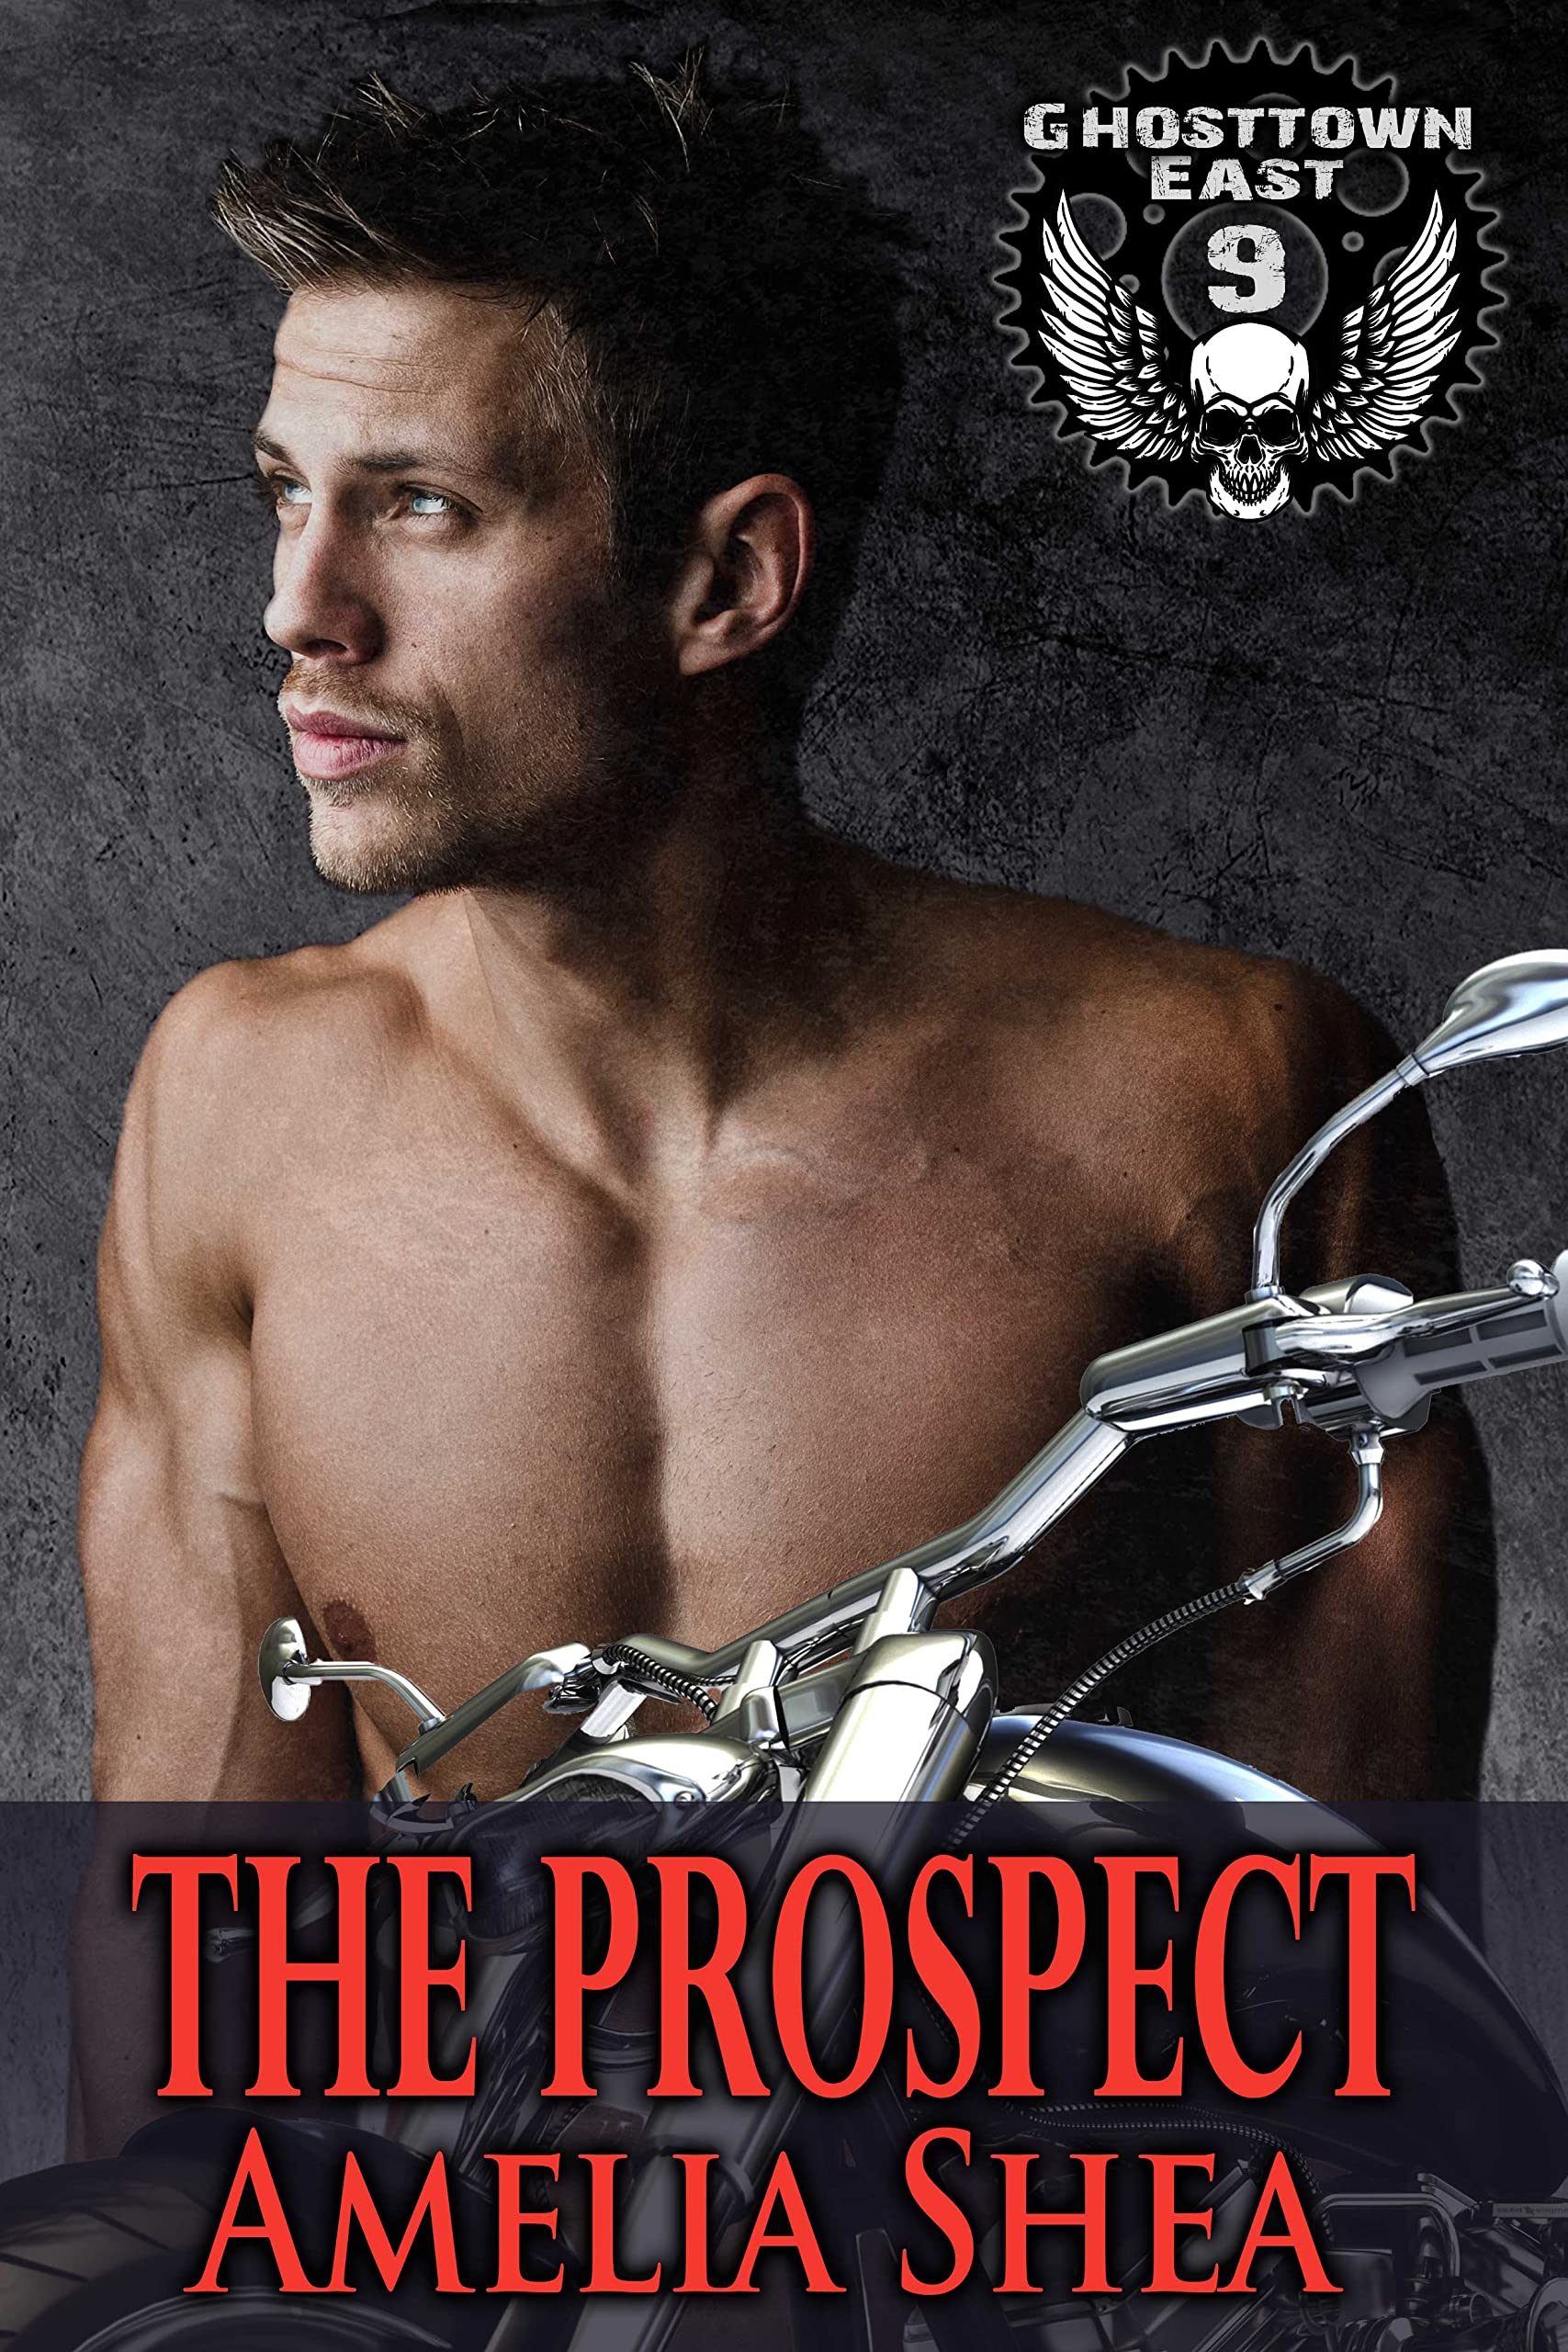 The Prospect by Amelia Shea PDF Download Video Library